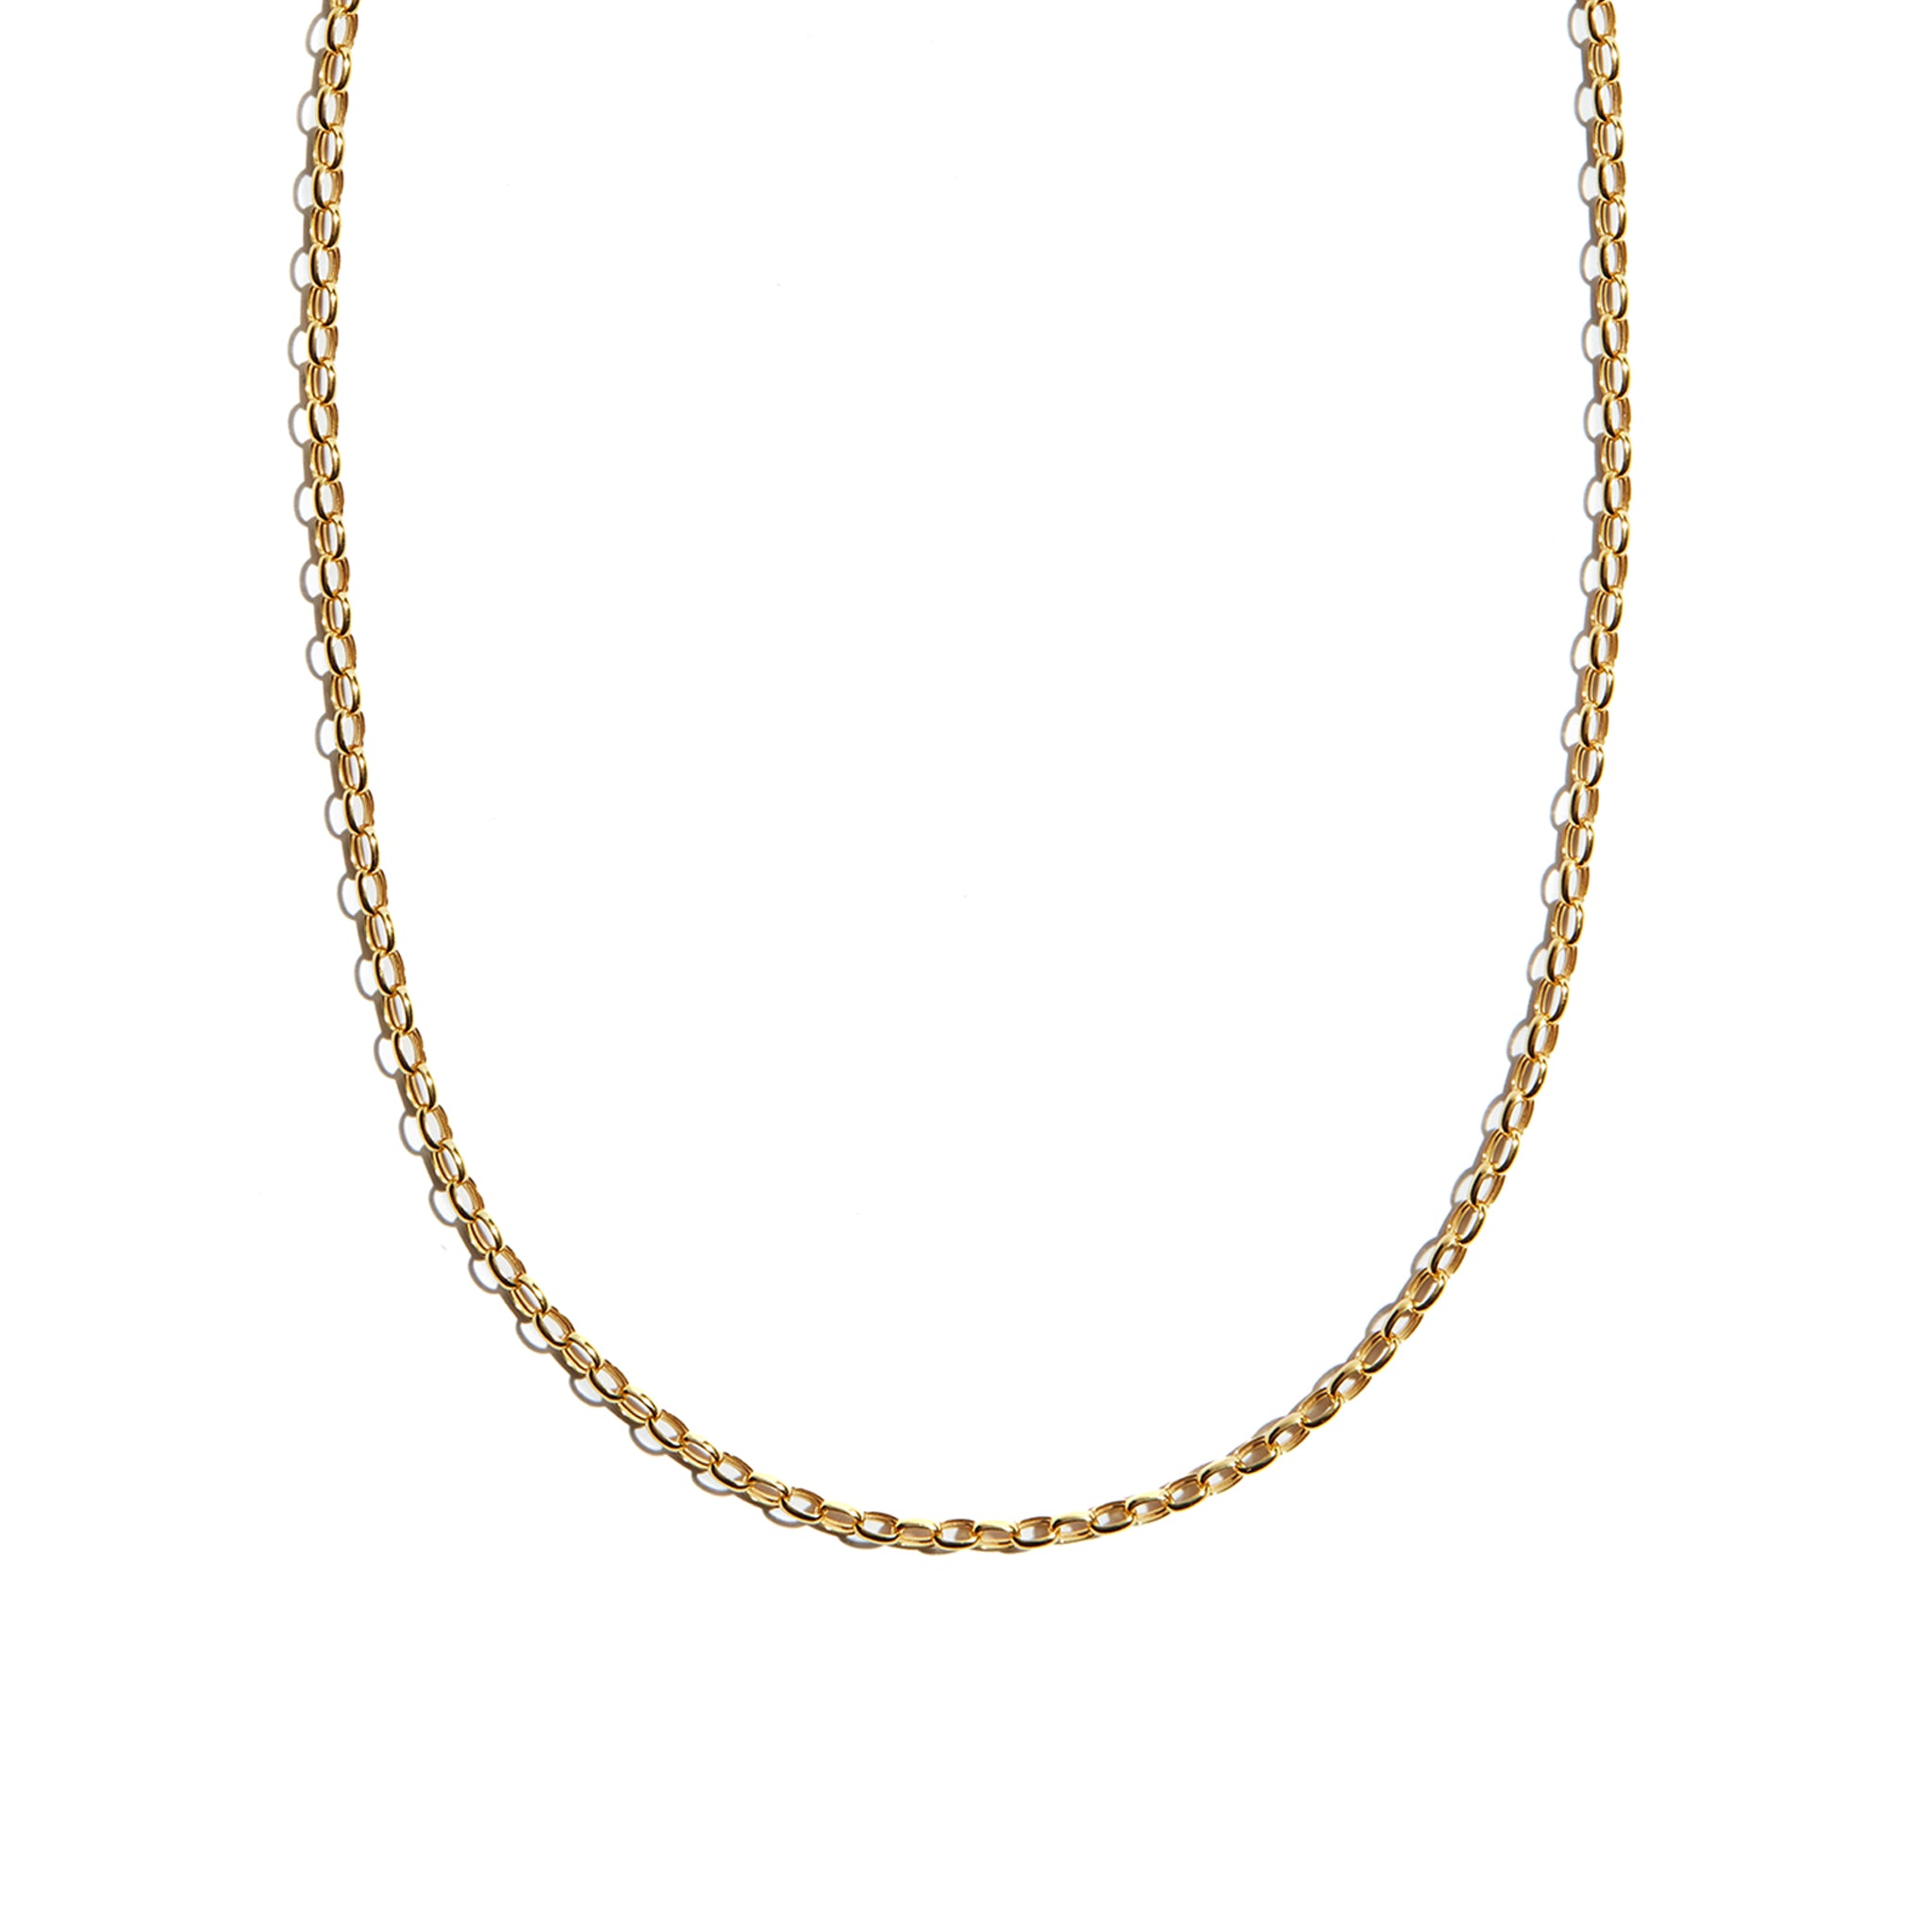 Discover the elegance of the 9ct Yellow Gold Minibel Filed Necklace. This charming accessory features intricate detailing in 9ct yellow gold, adding a touch of sophistication to any ensemble.